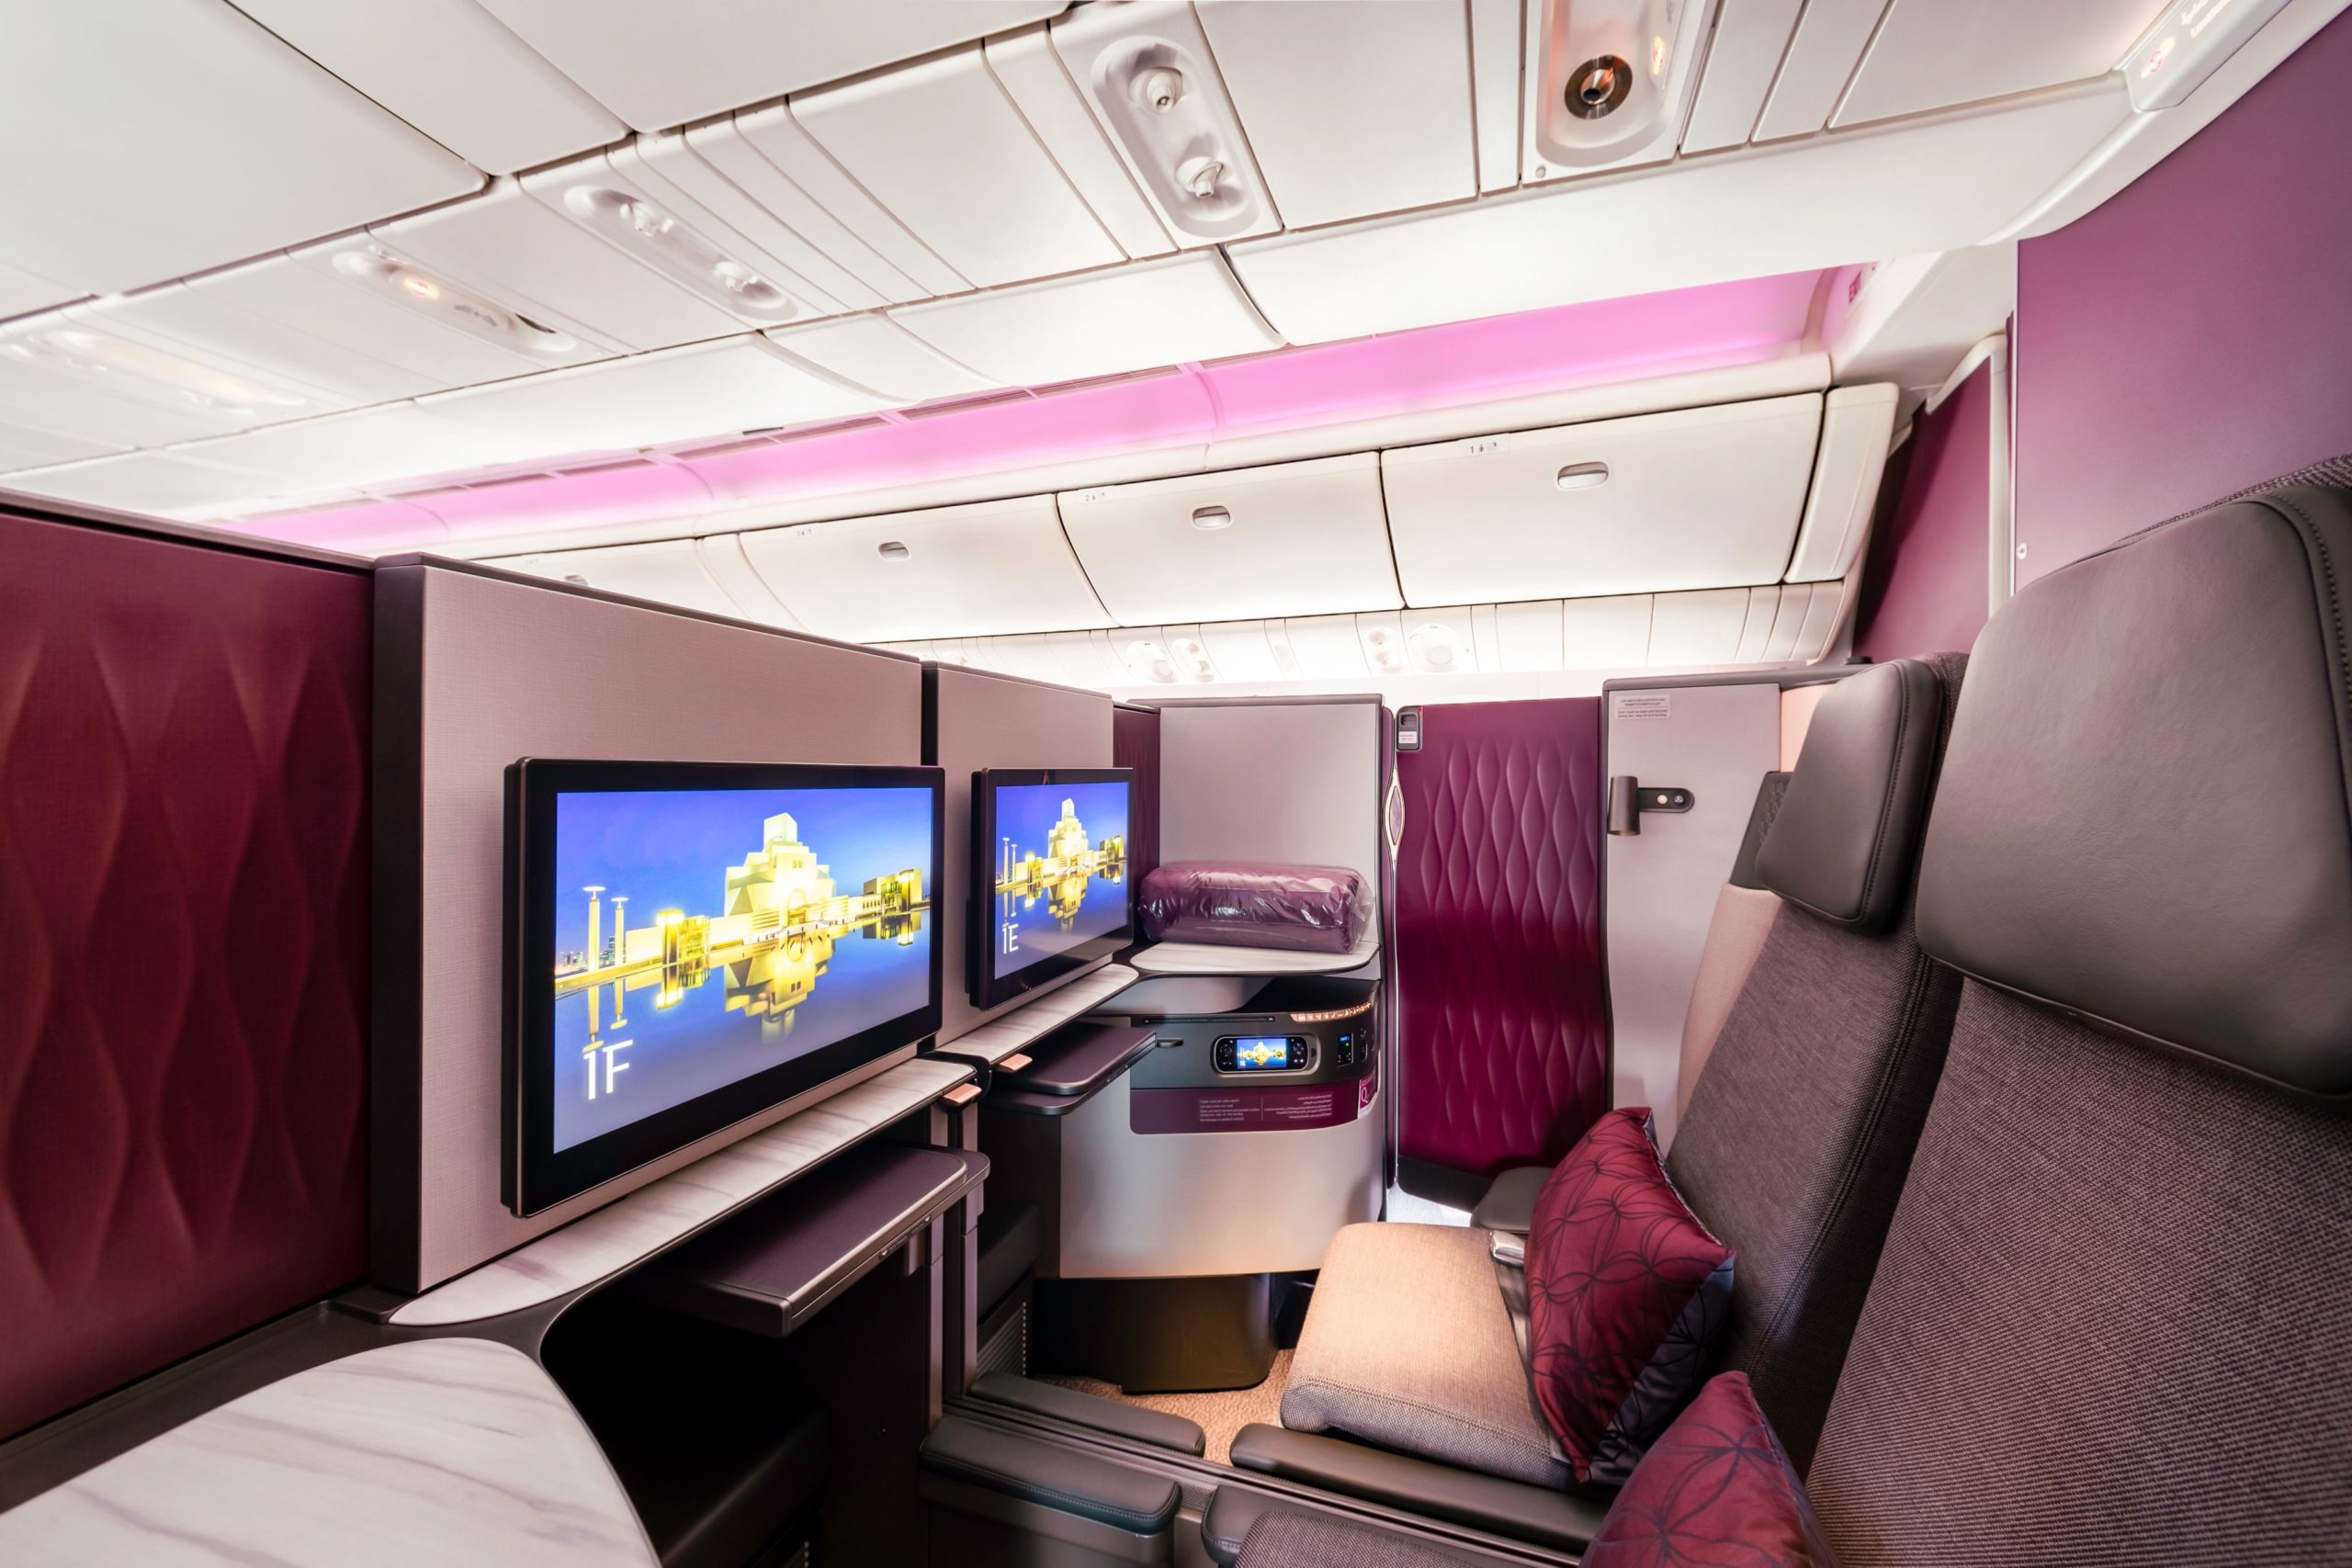 The Complete Guide to Booking Qatar Airways Qsuites